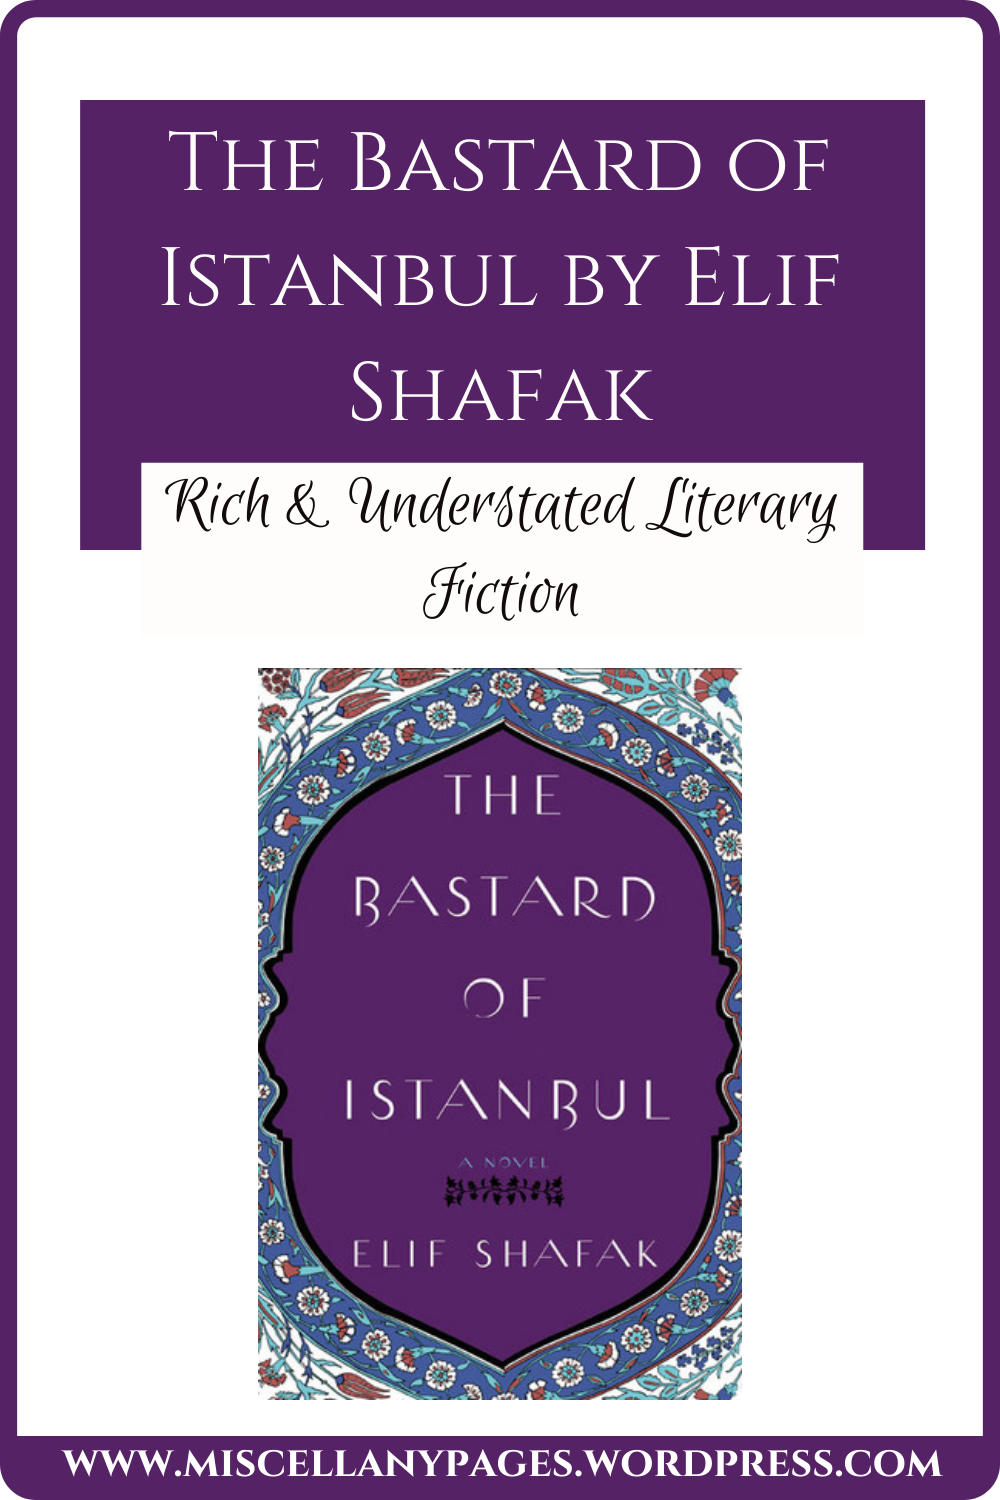 The Bastard of Istanbul by Elif Shafak Book Review Pinterest Graphic